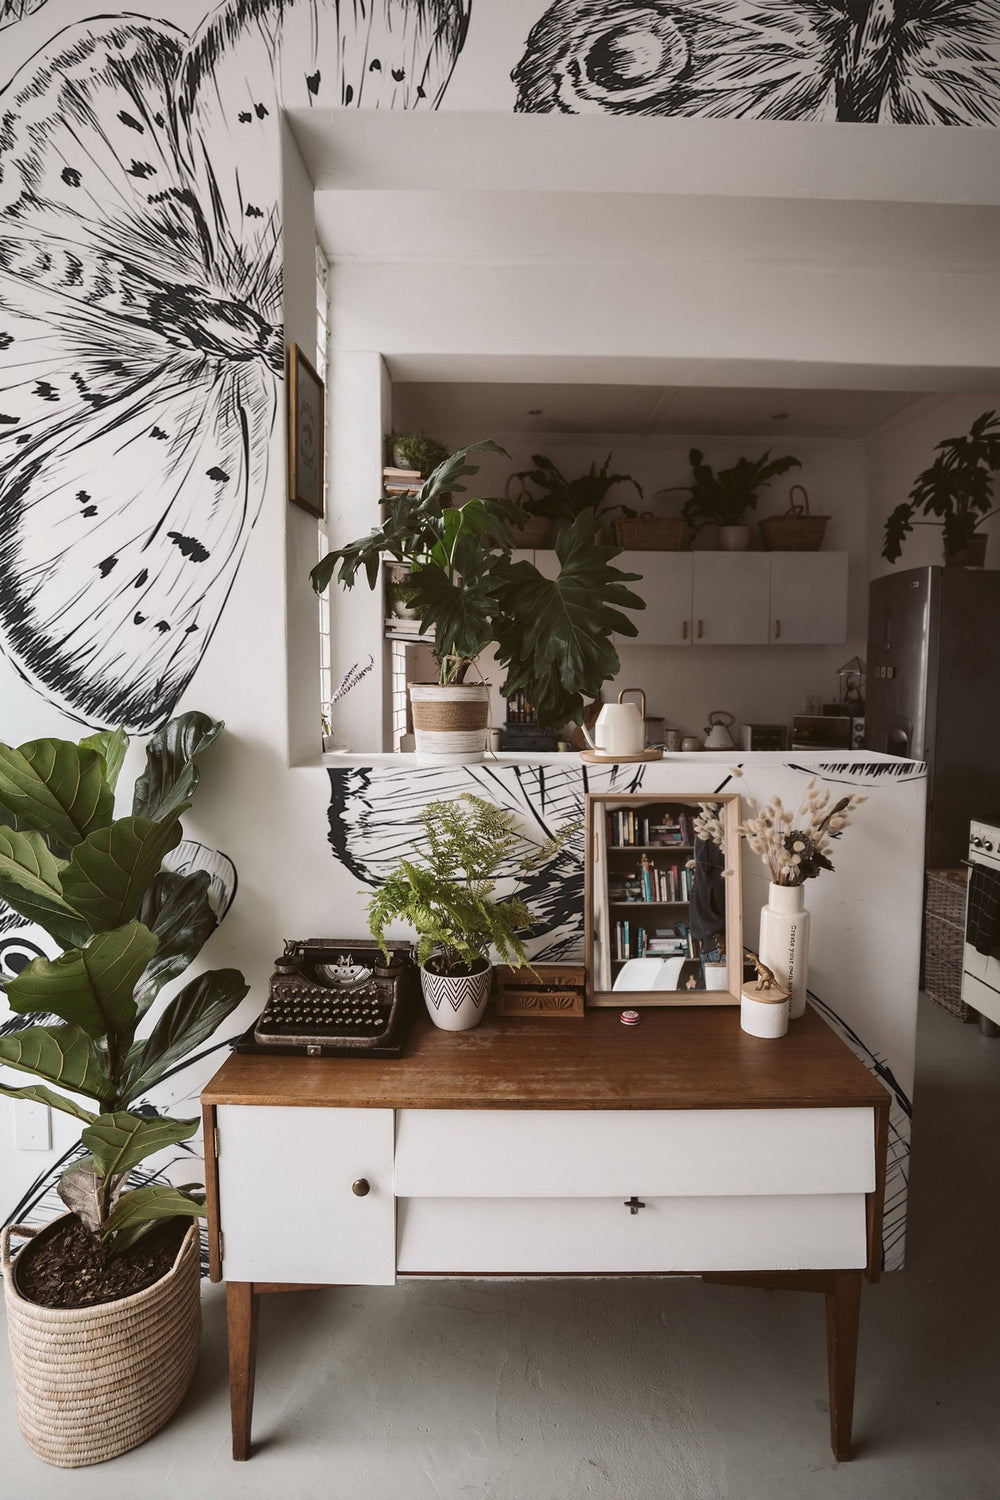 A cozy room interior featuring a stylish vintage desk, potted plants, and a striking black and white floral wall mural.